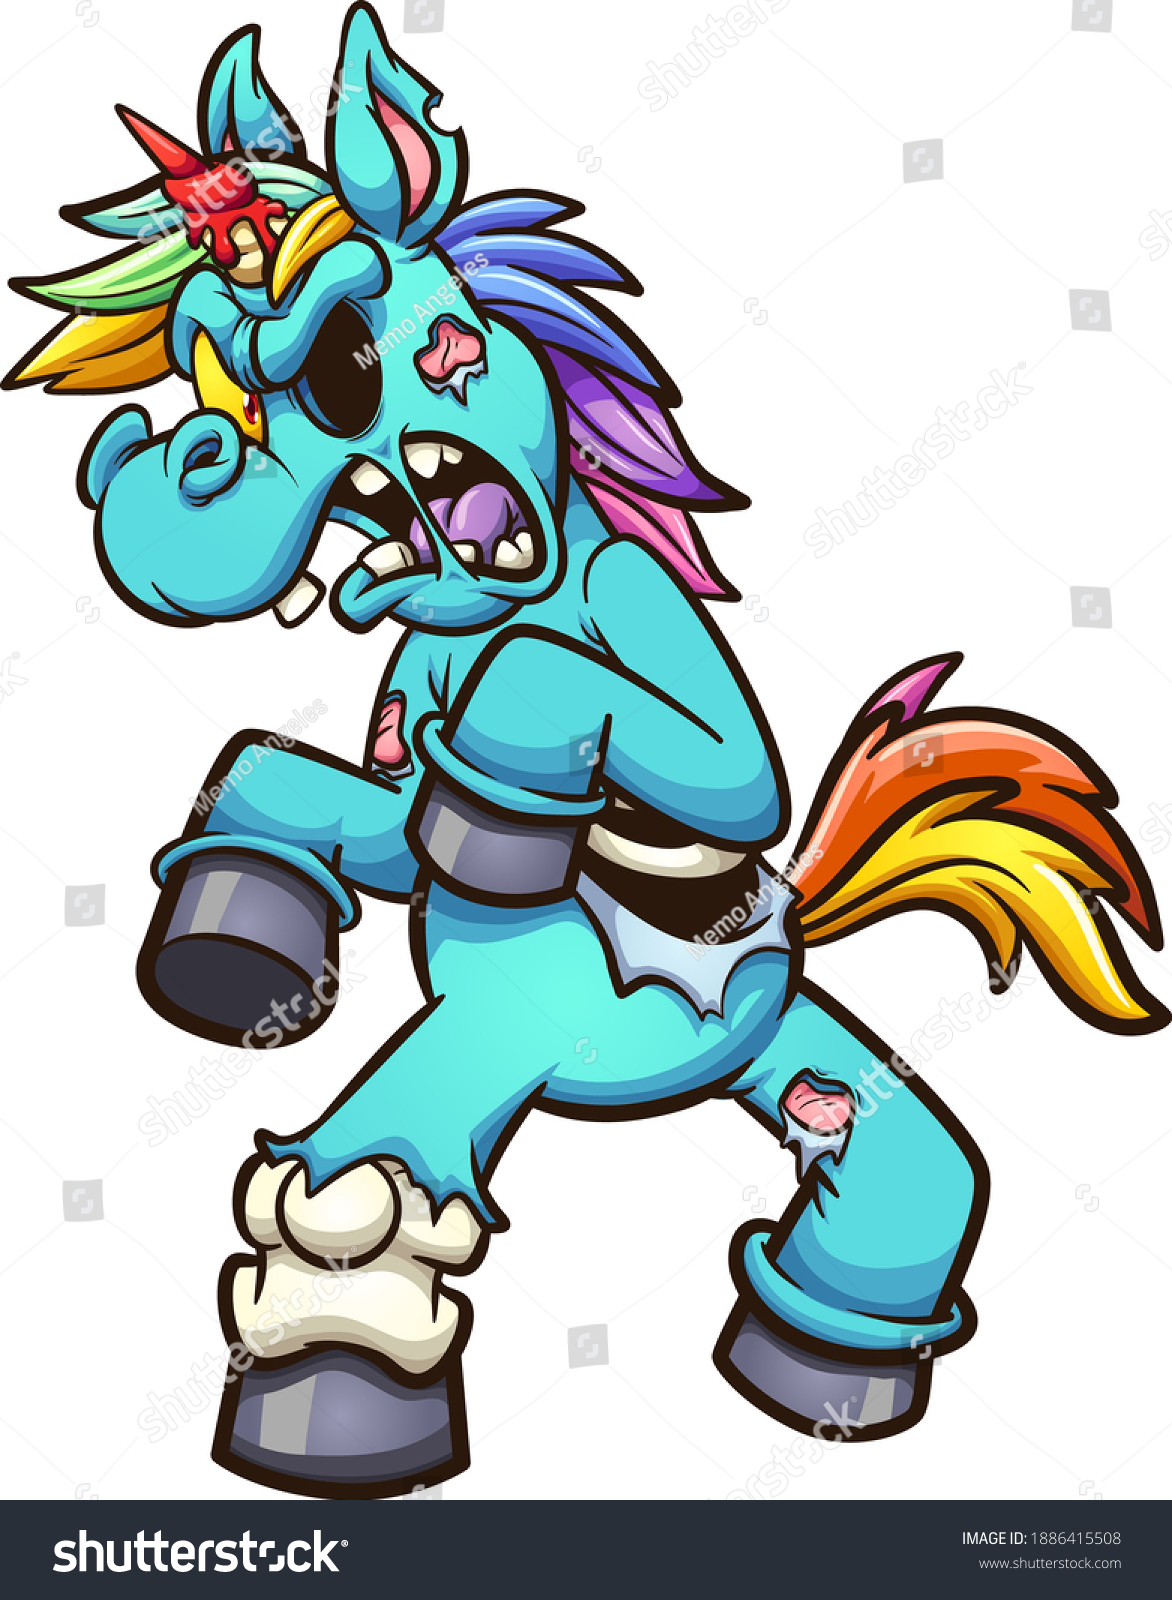 SVG of Zombie unicorn walking angry with bloody horn. Vector clip art illustration with simple gradients. All on a single layer.
 svg